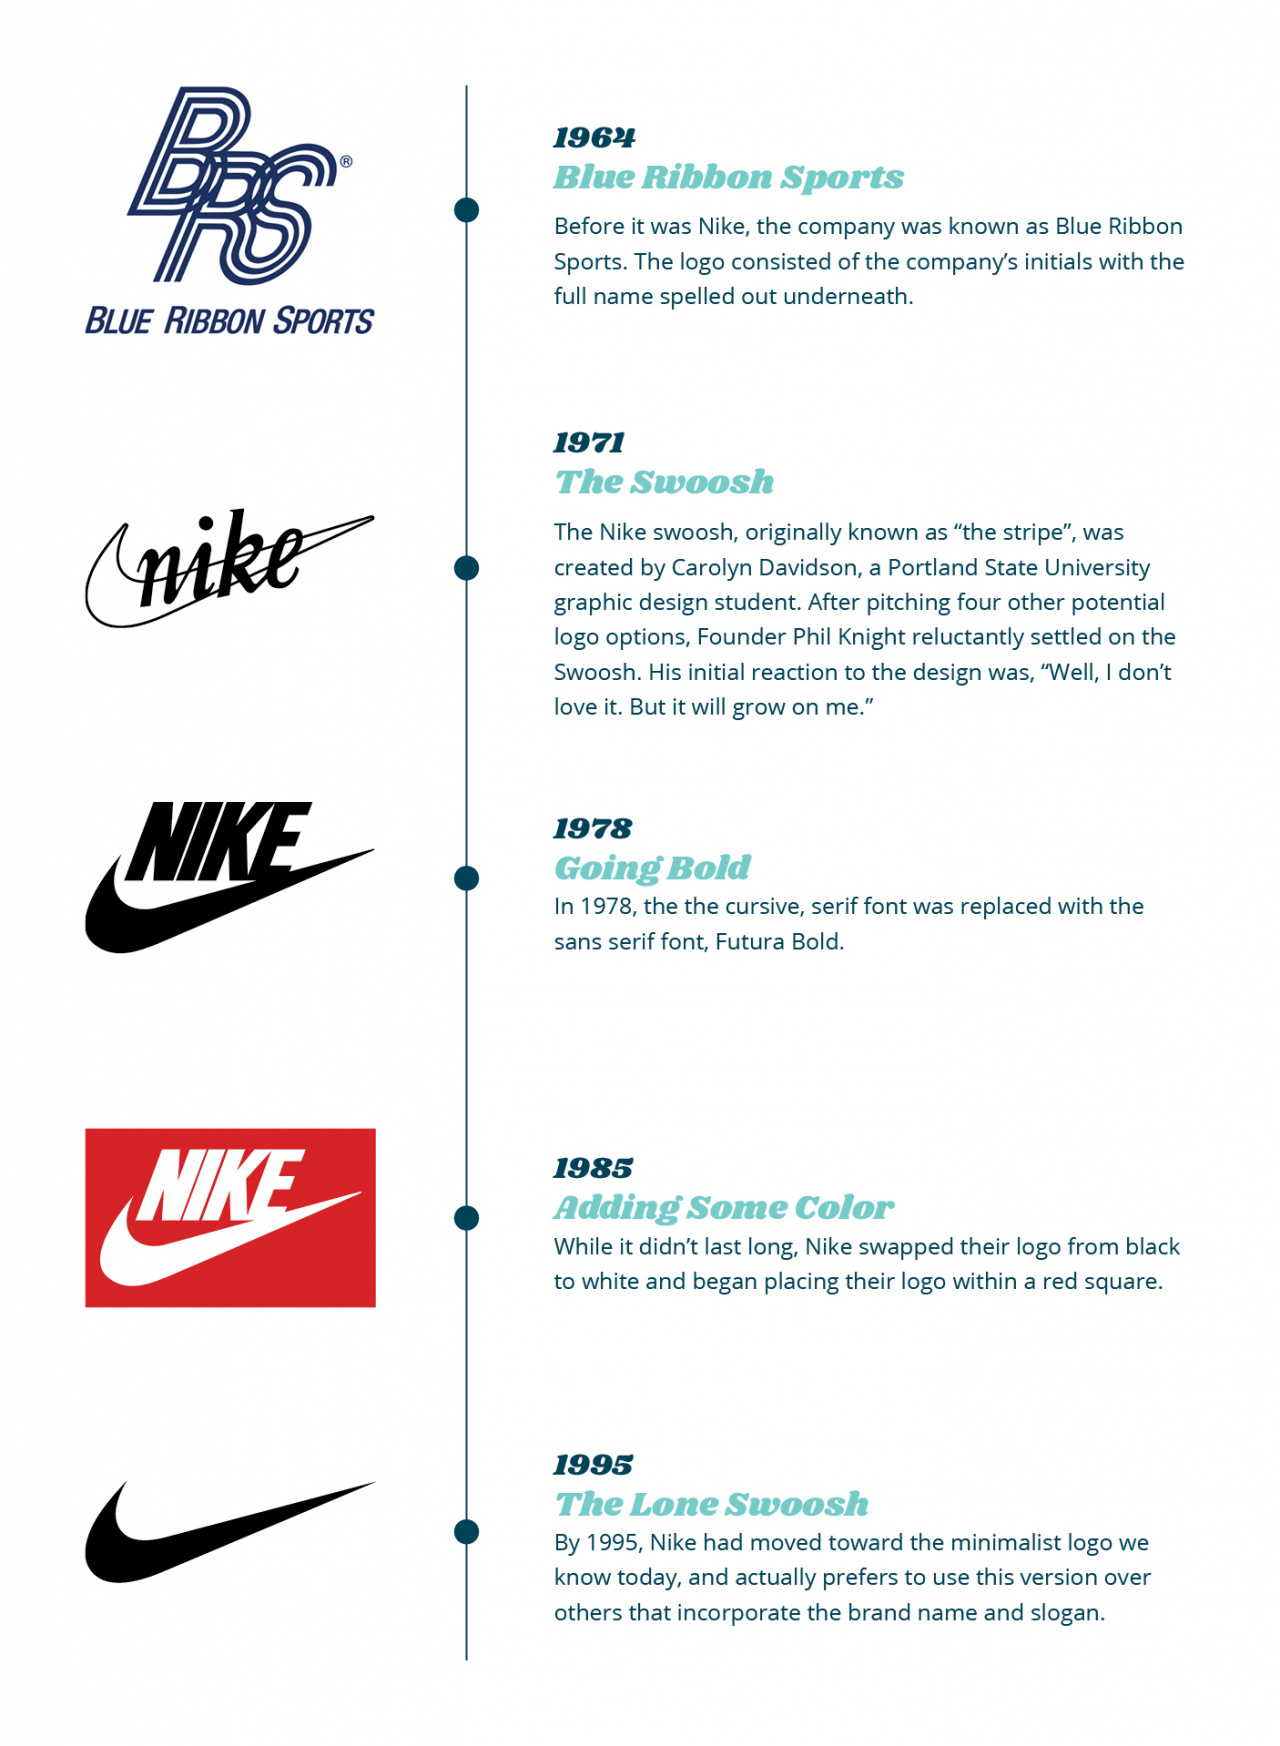 Popular Logos and How They Have Transformed Over Time - Systemax Solutions